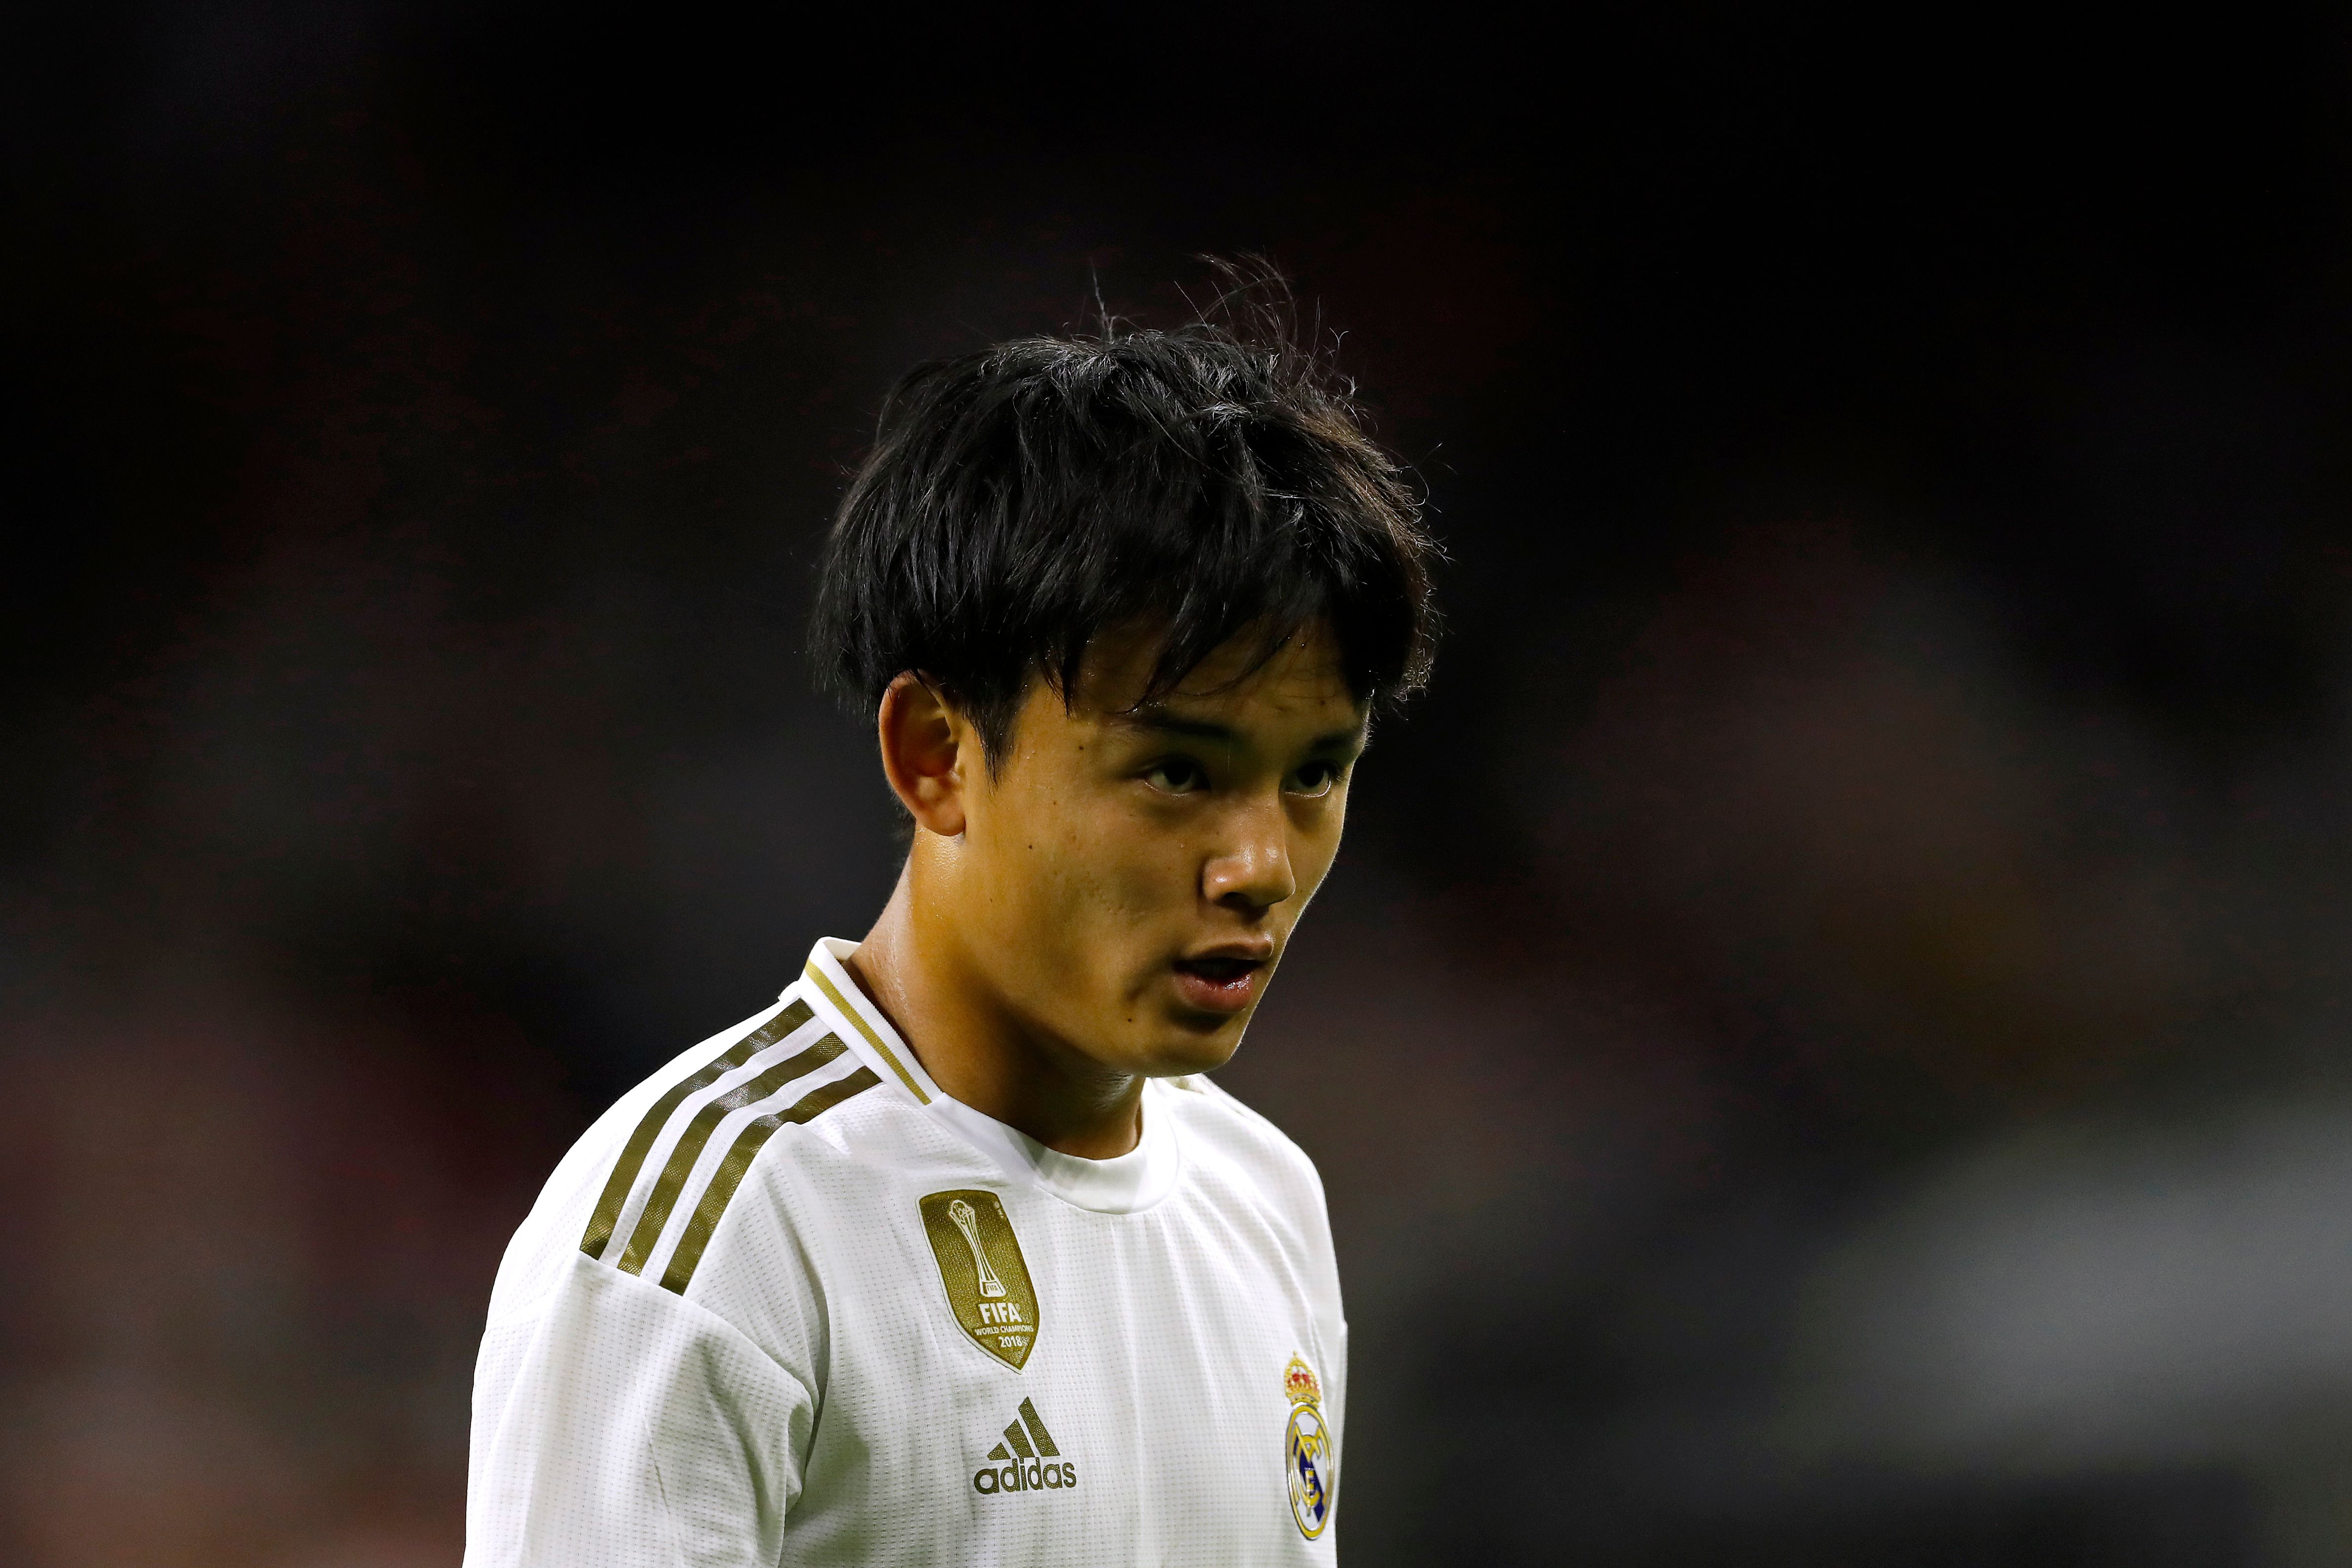 Real Madrid midfielder Takefusa Kubo looks on against Bayern Munich during their International Champions Cup match on July 20, 2019 at NRG Stadium in Houston, Texas. (Photo by AARON M. SPRECHER / AFP)        (Photo credit should read AARON M. SPRECHER/AFP/Getty Images)